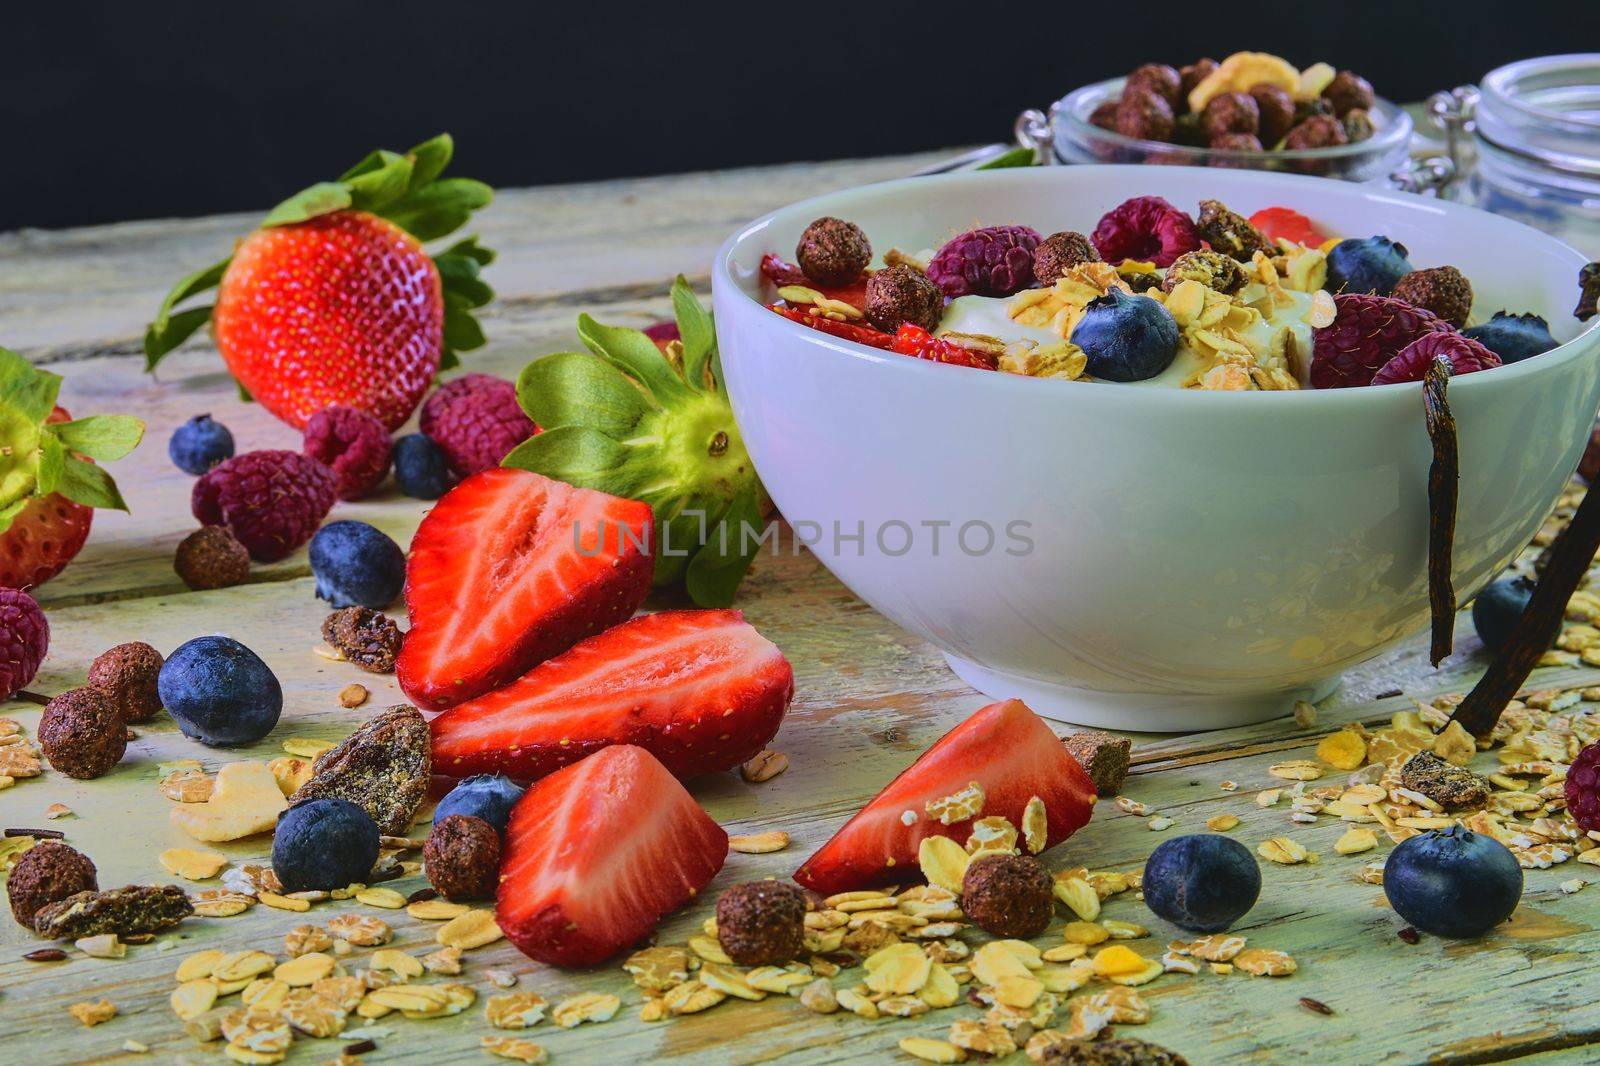 Healthy breakfast, cereal with yoghurt, strawberries, blueberries, raspberries and muesli on wooden rustic background.  Concept of: fitness, diet, wellness and breakfasts.